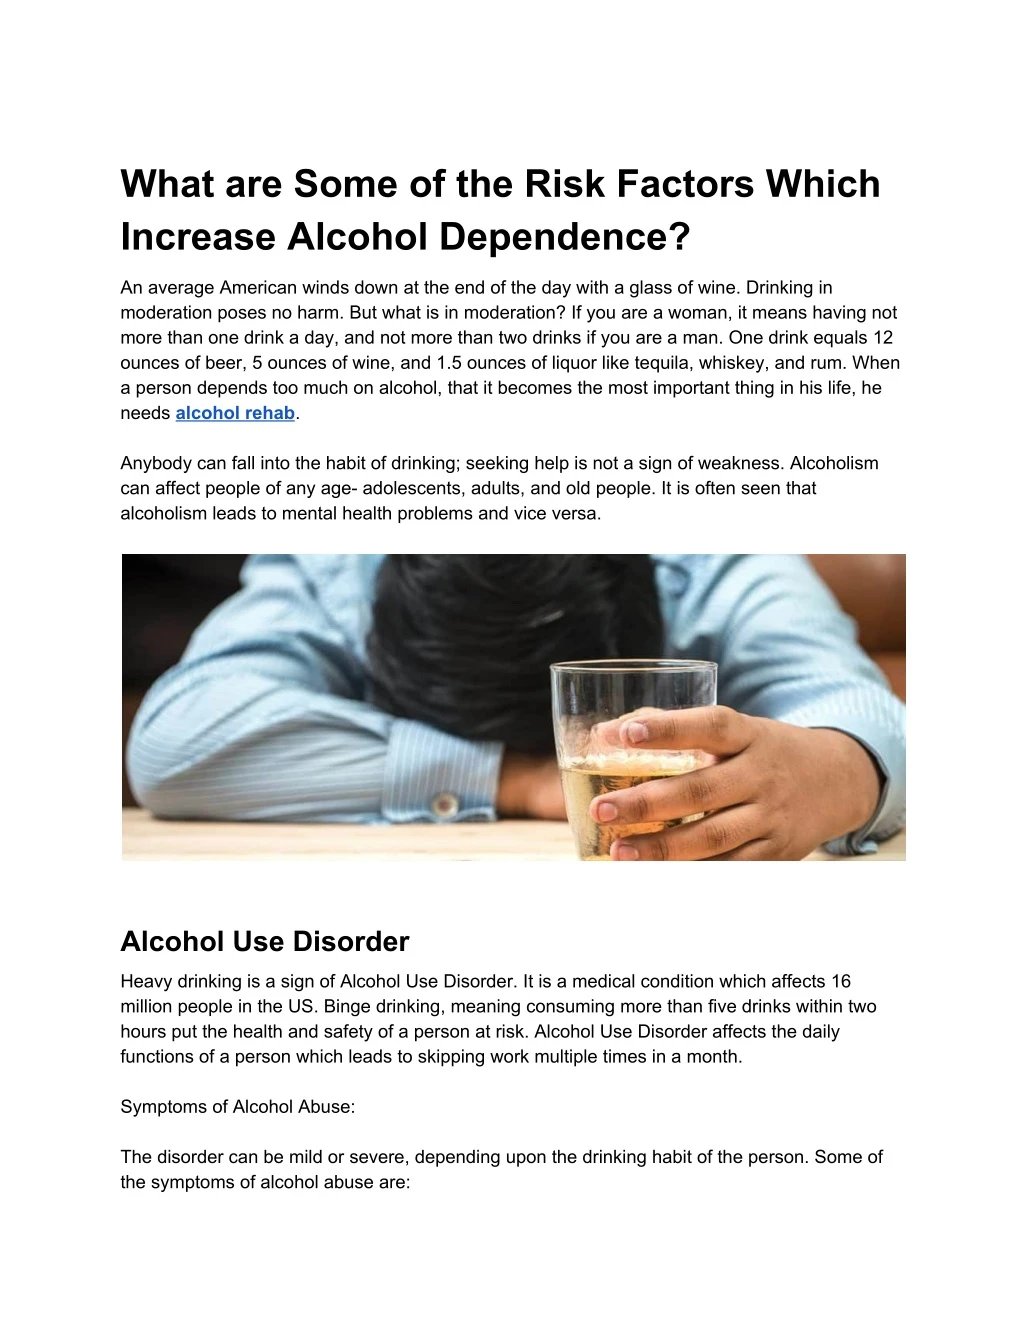 what are some of the risk factors which increase